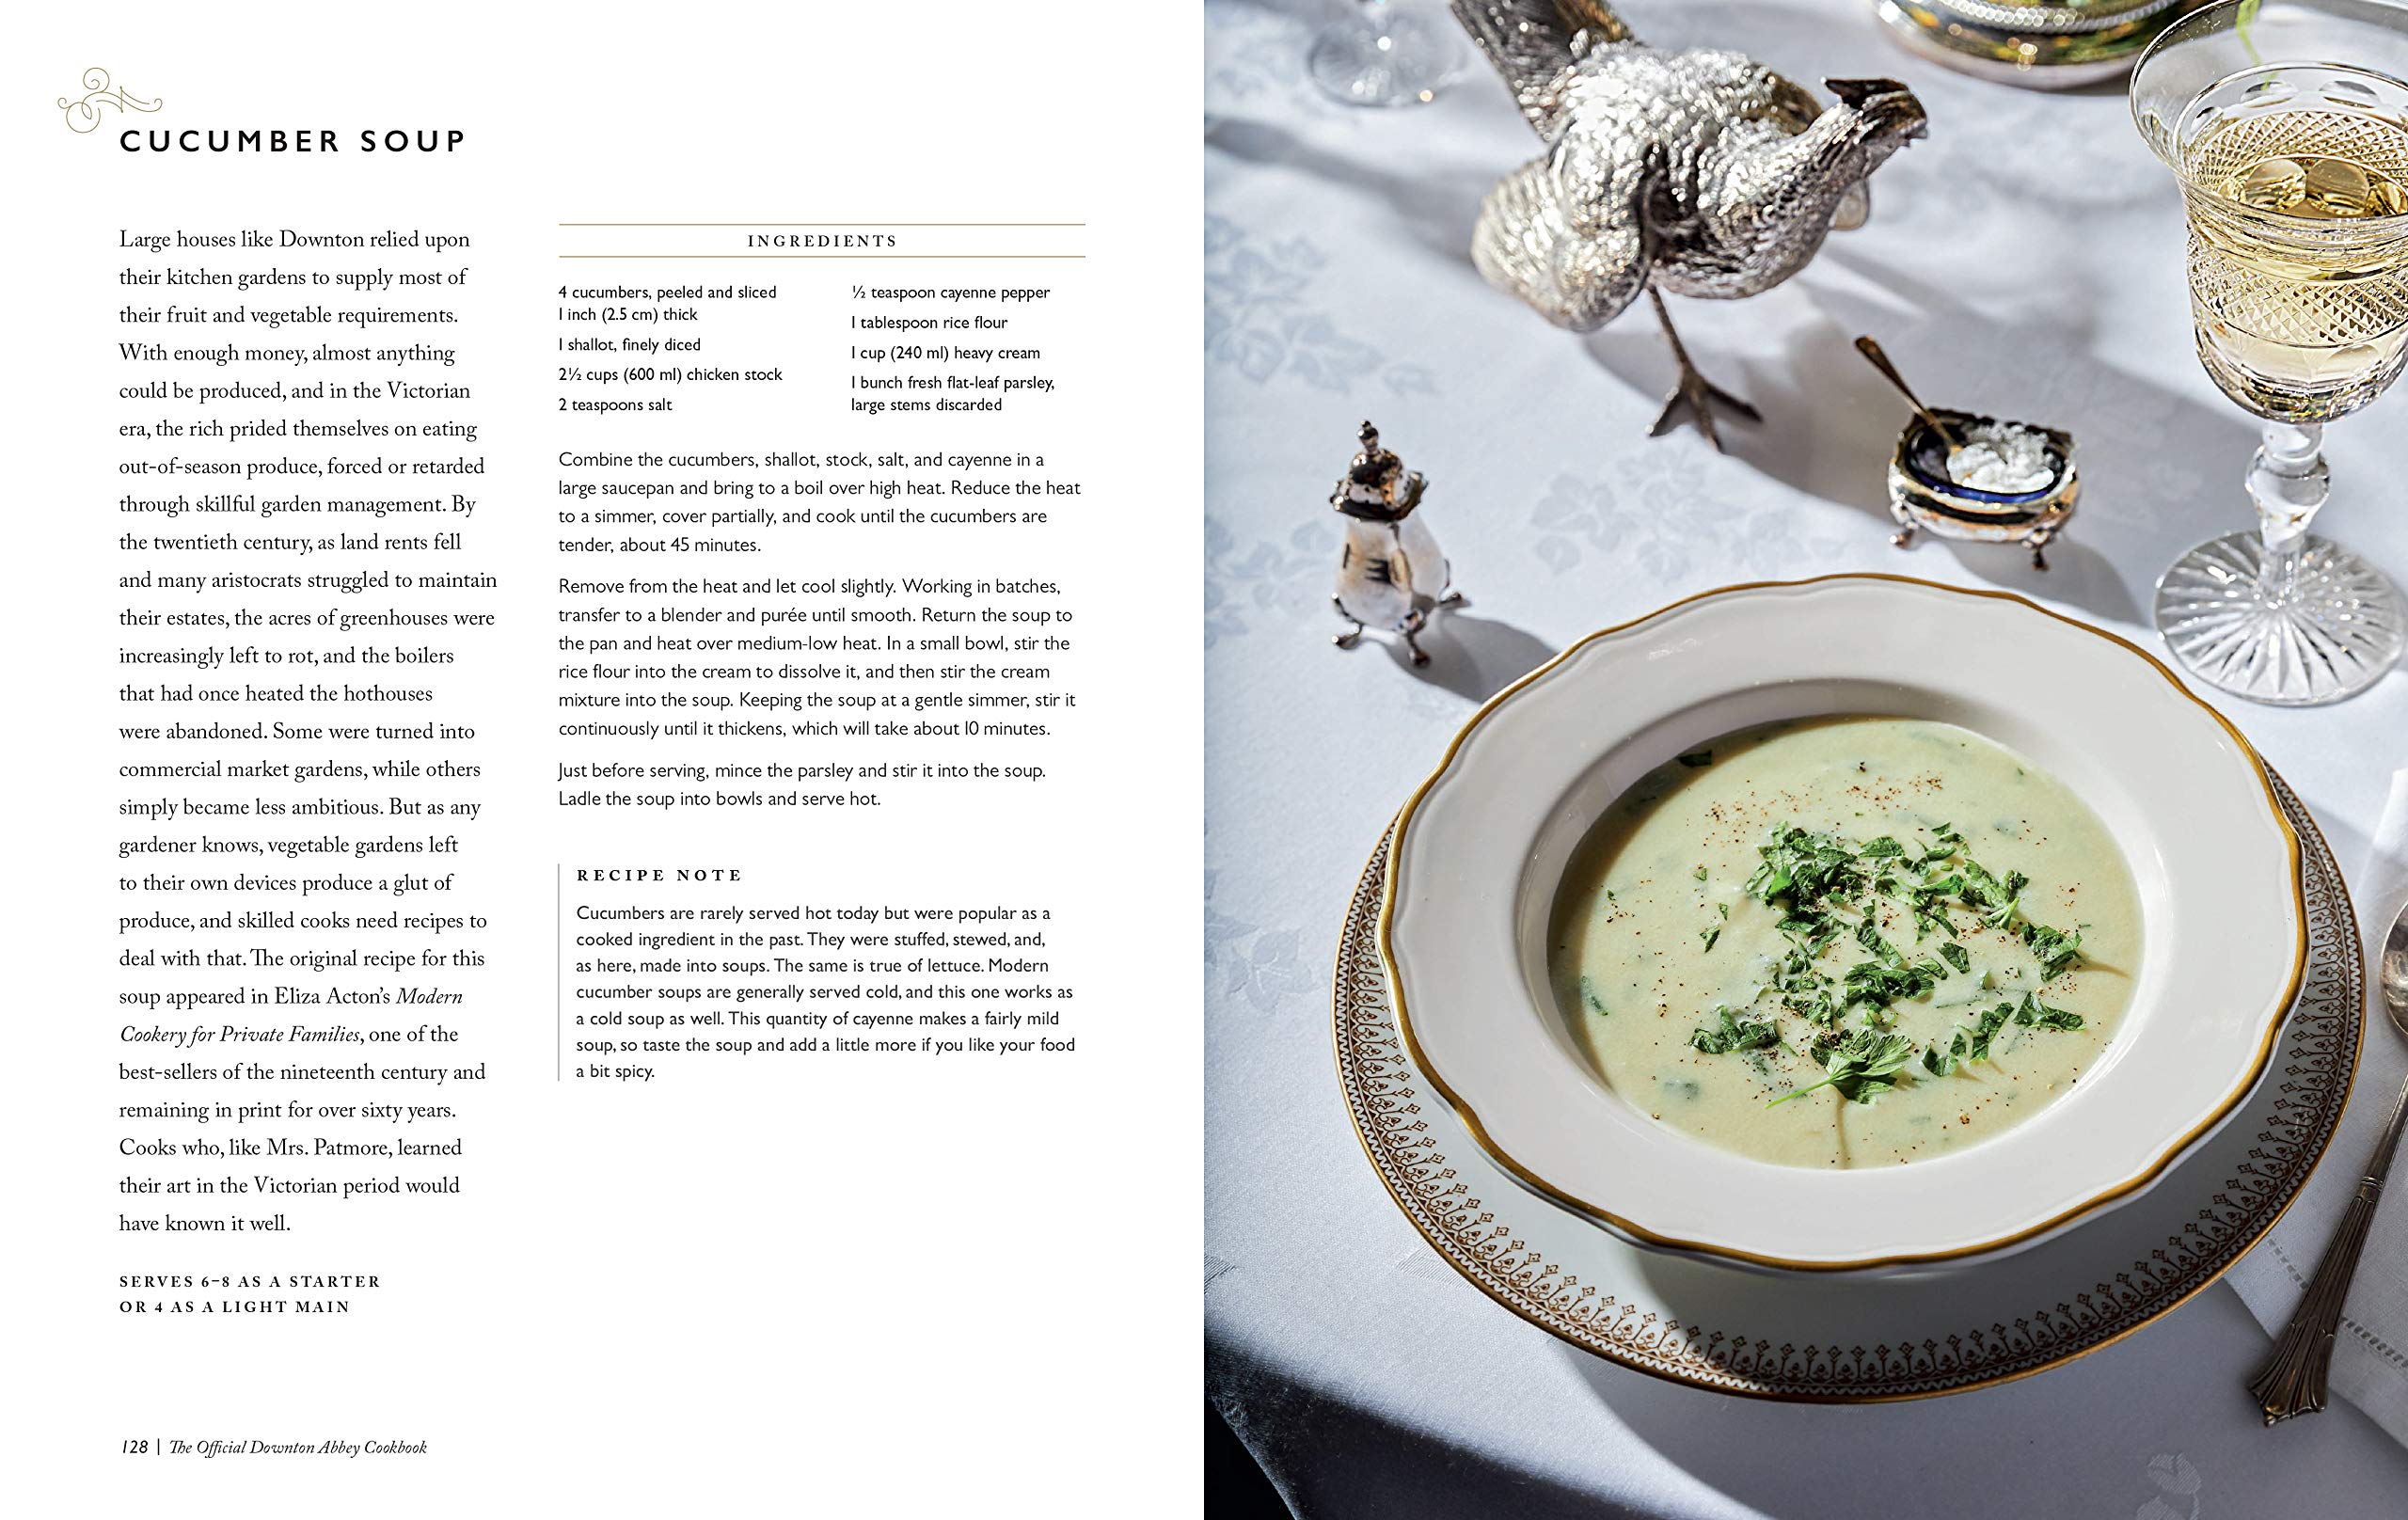 The Official Downton Abbey Cookbook (Downton Abbey Cookery)